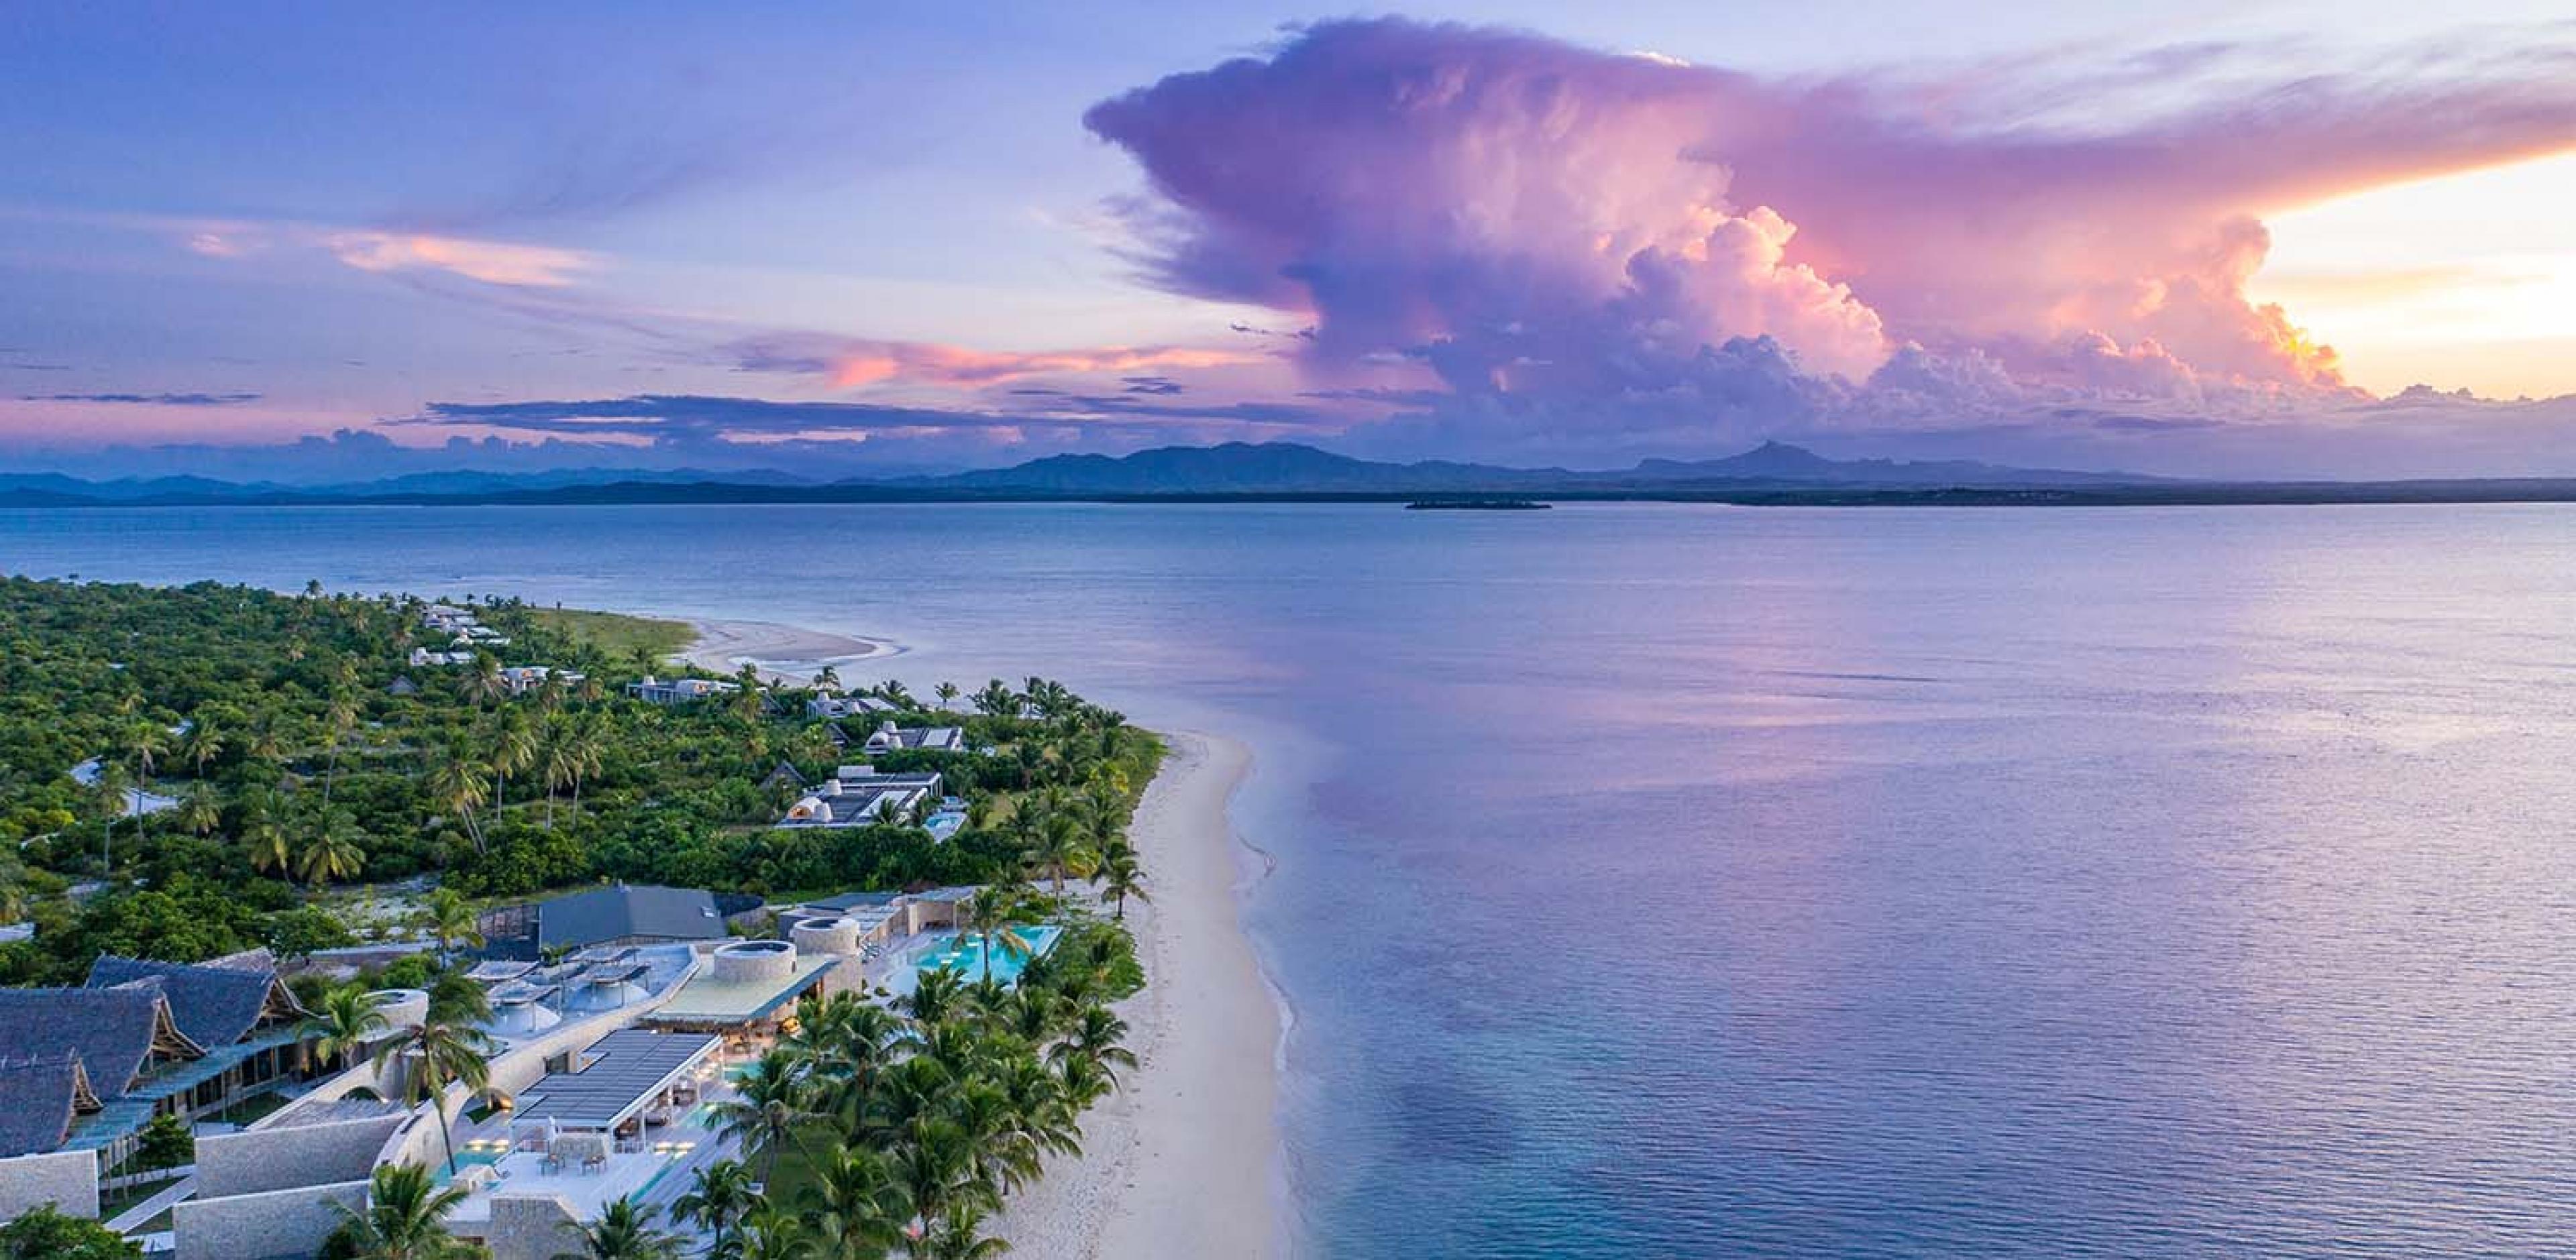 drone view of a villa along the beach and pink and purple clouds reflected in the sea